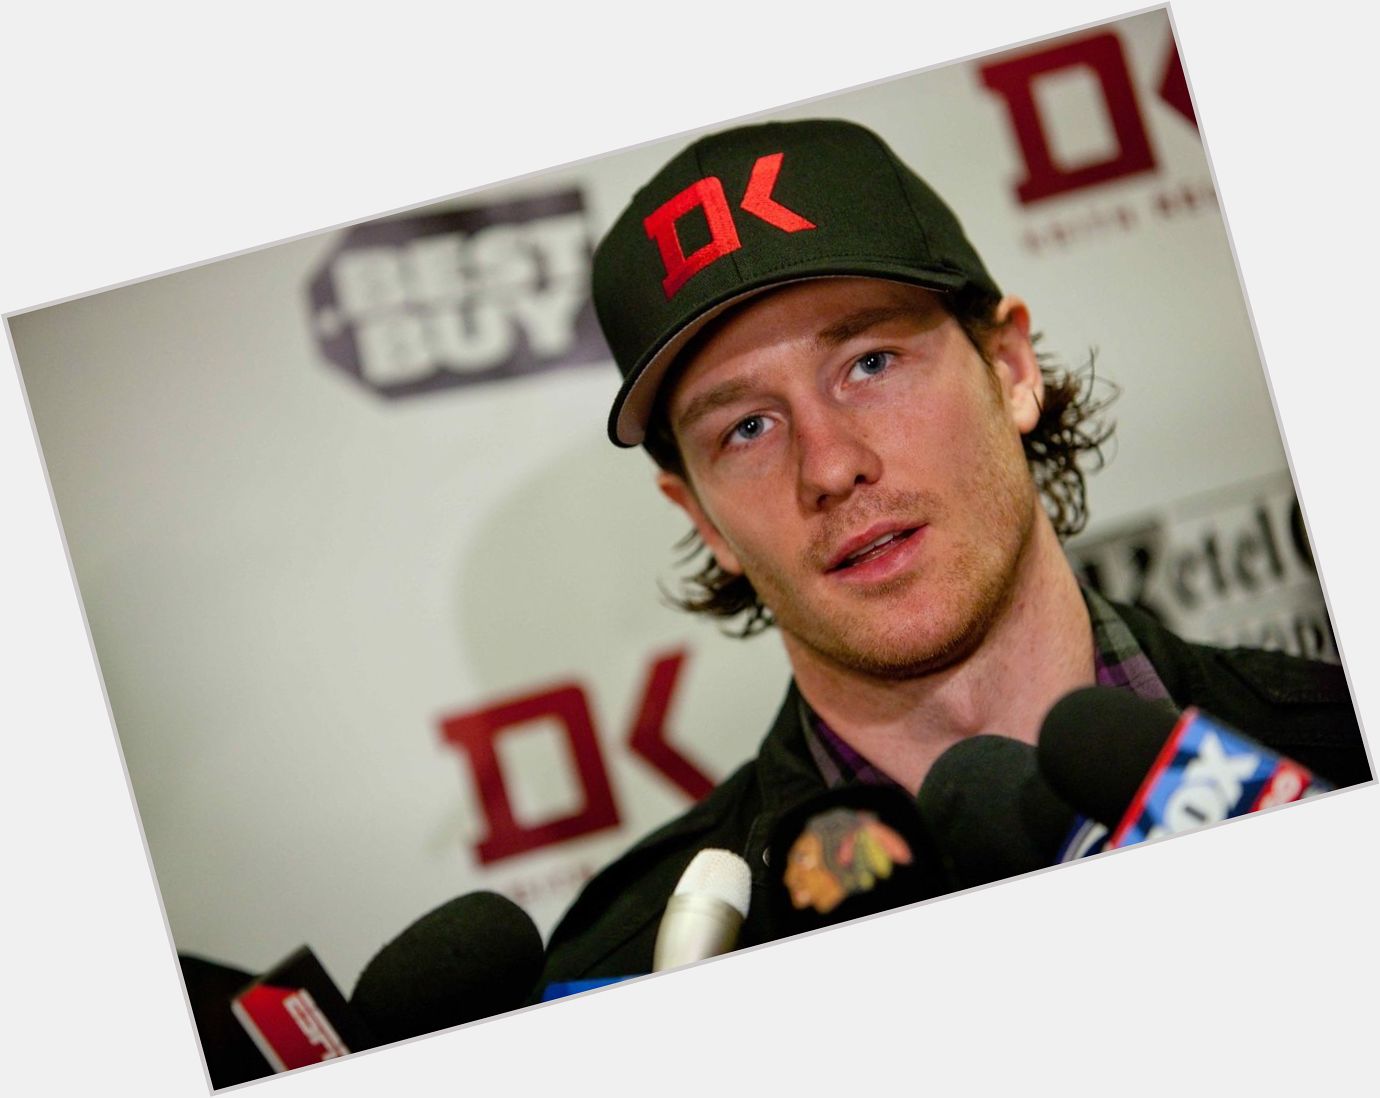 Duncan Keith hairstyle 3